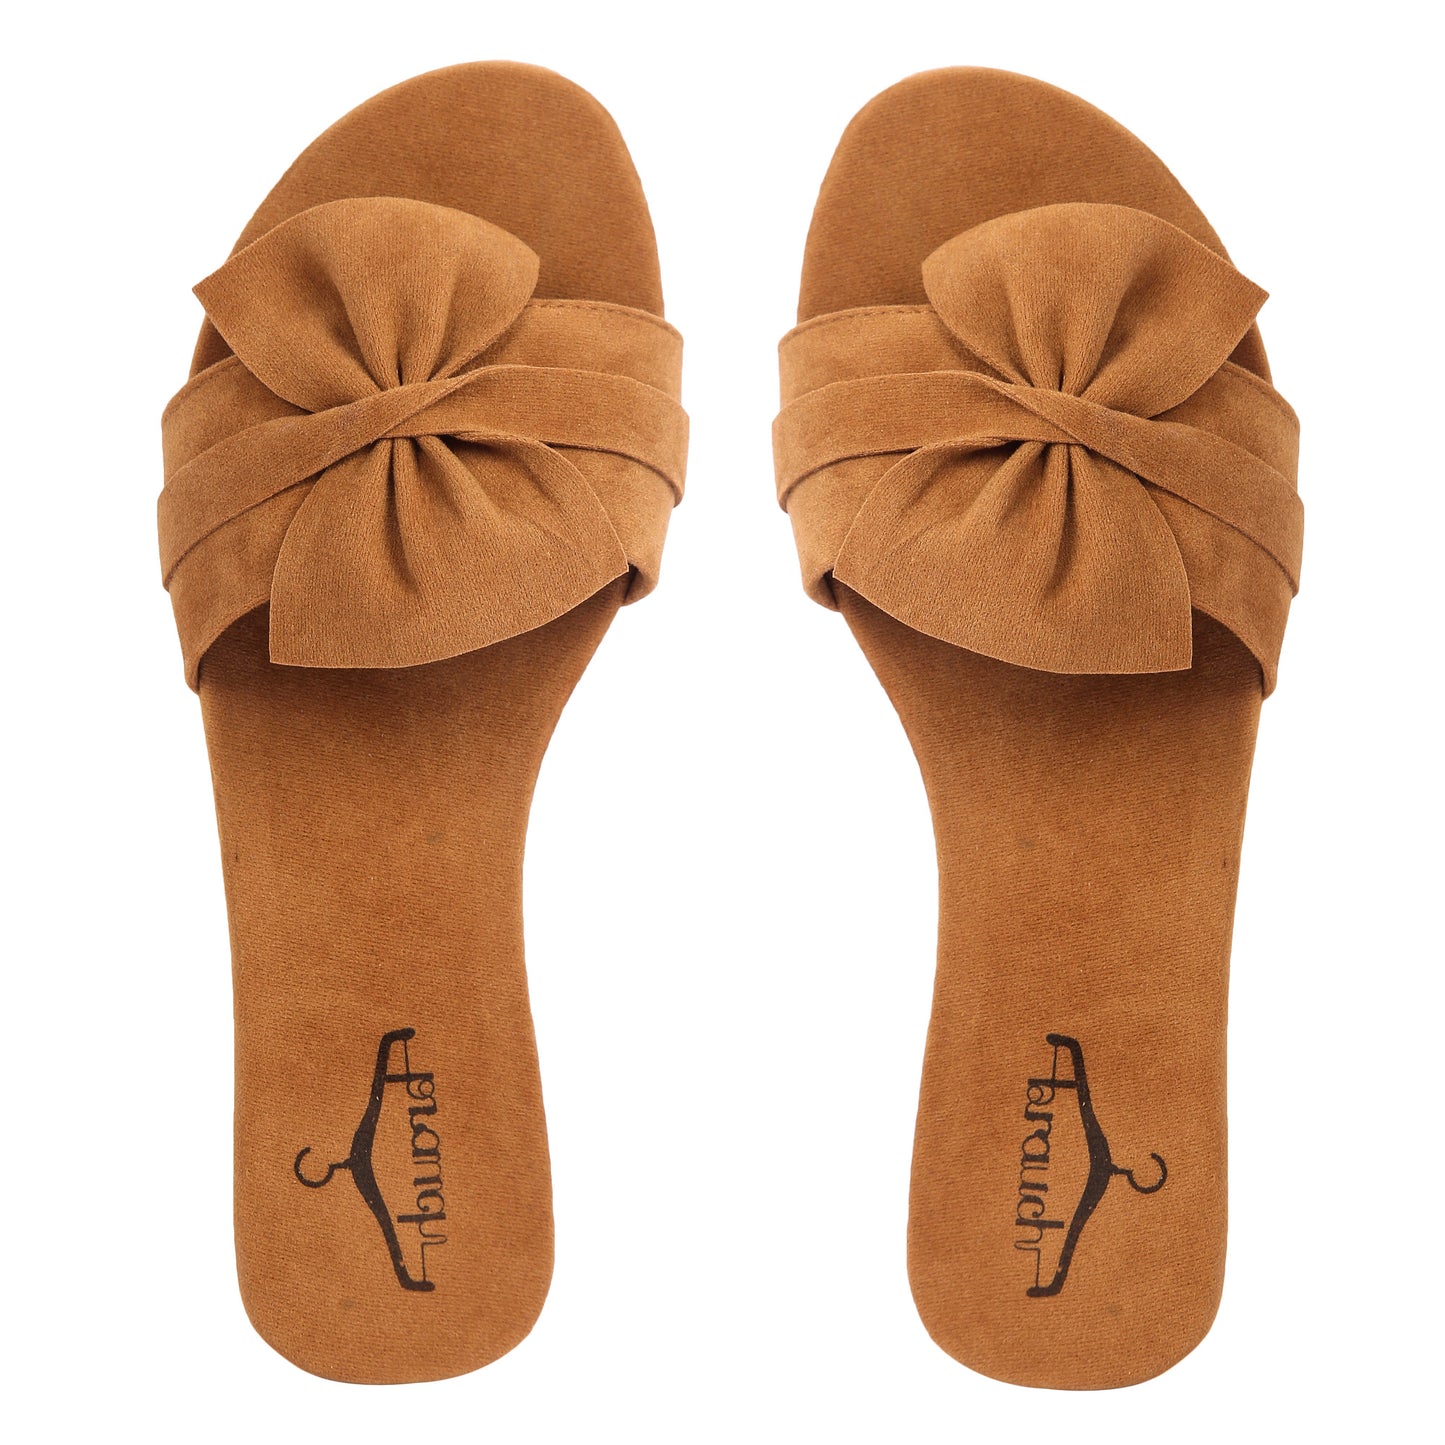 Brauch Women's Royal Brown Suede Bow Flats/Slippers